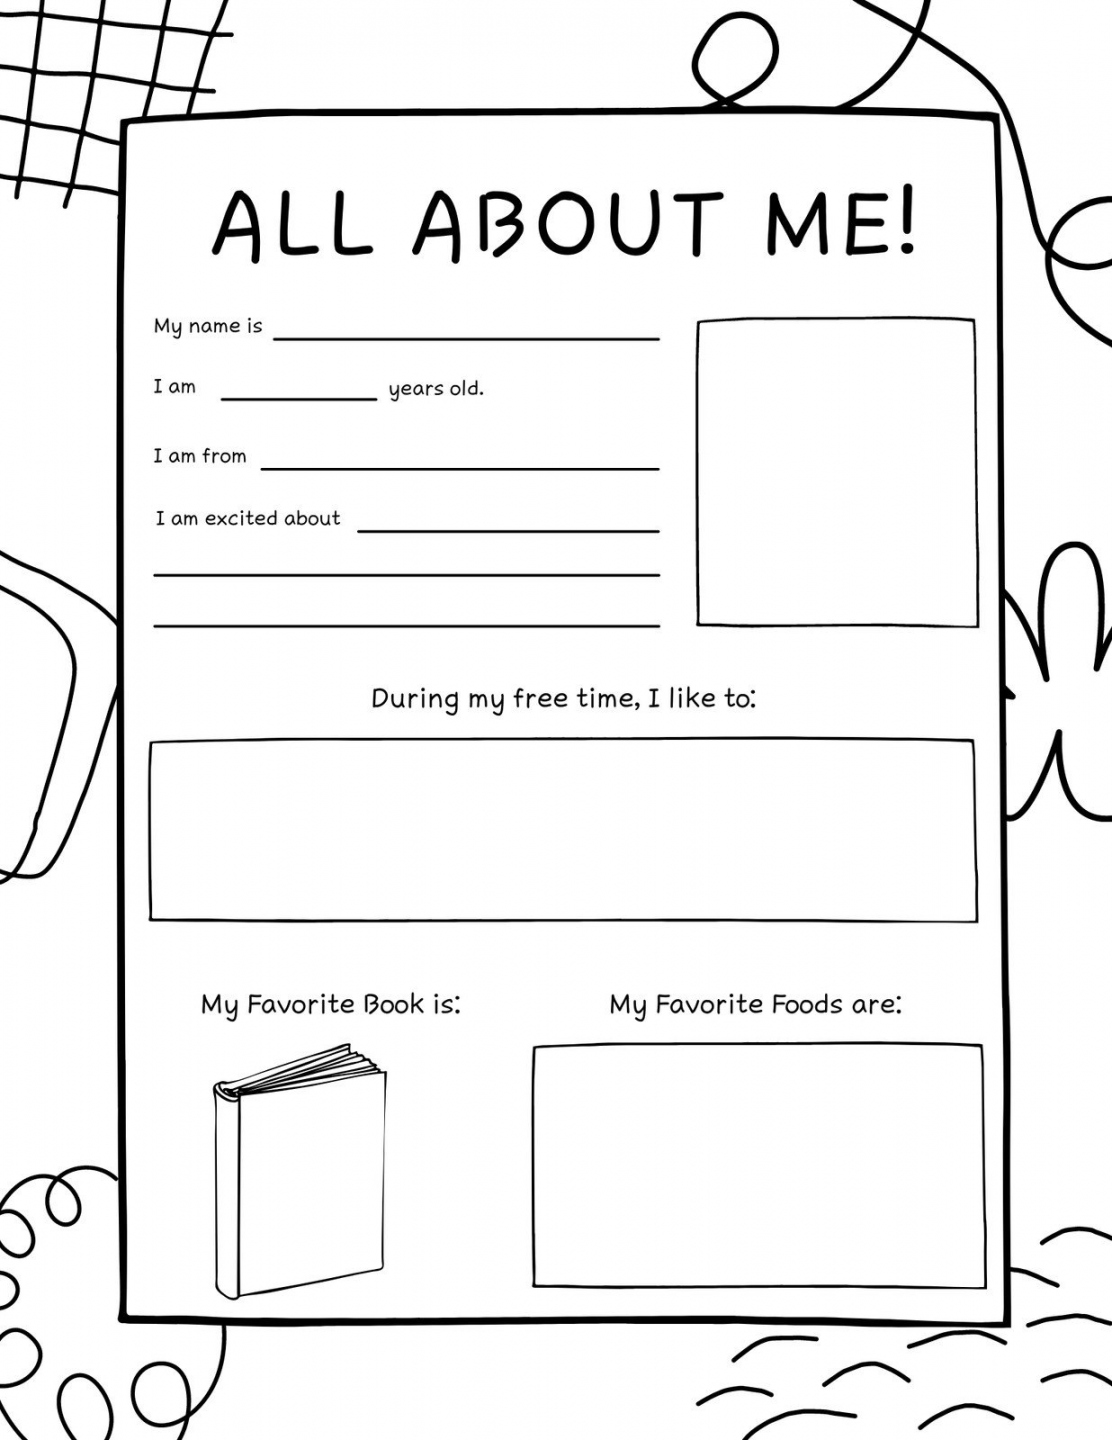 all-about-me-booklet-all-about-me-printable-all-about-me-art-library